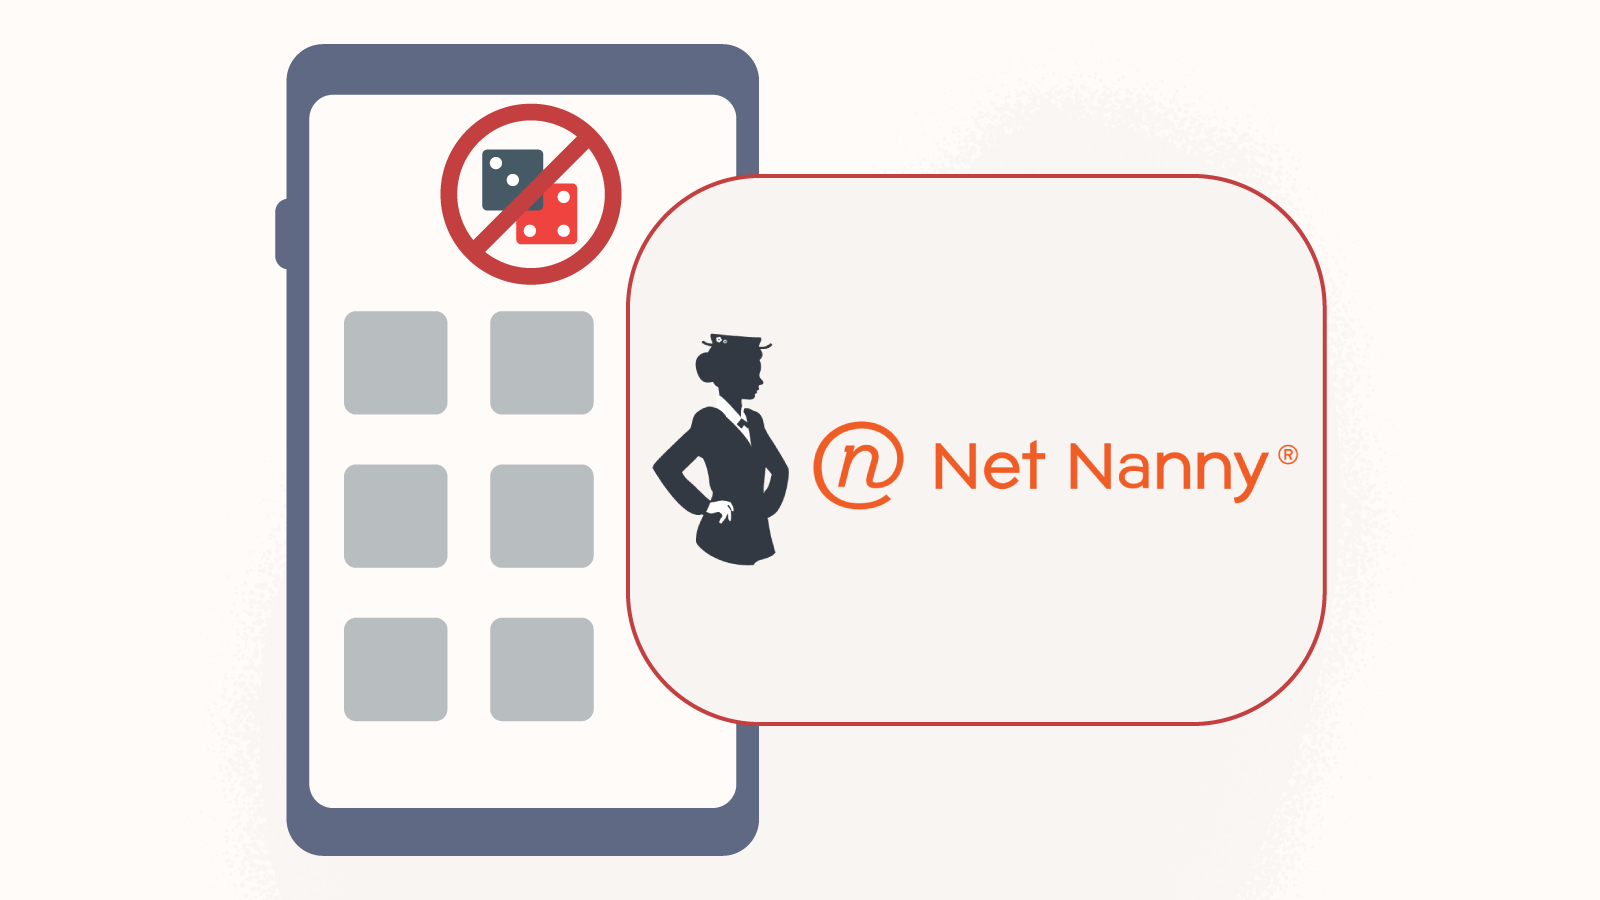 What does Net Nanny offer